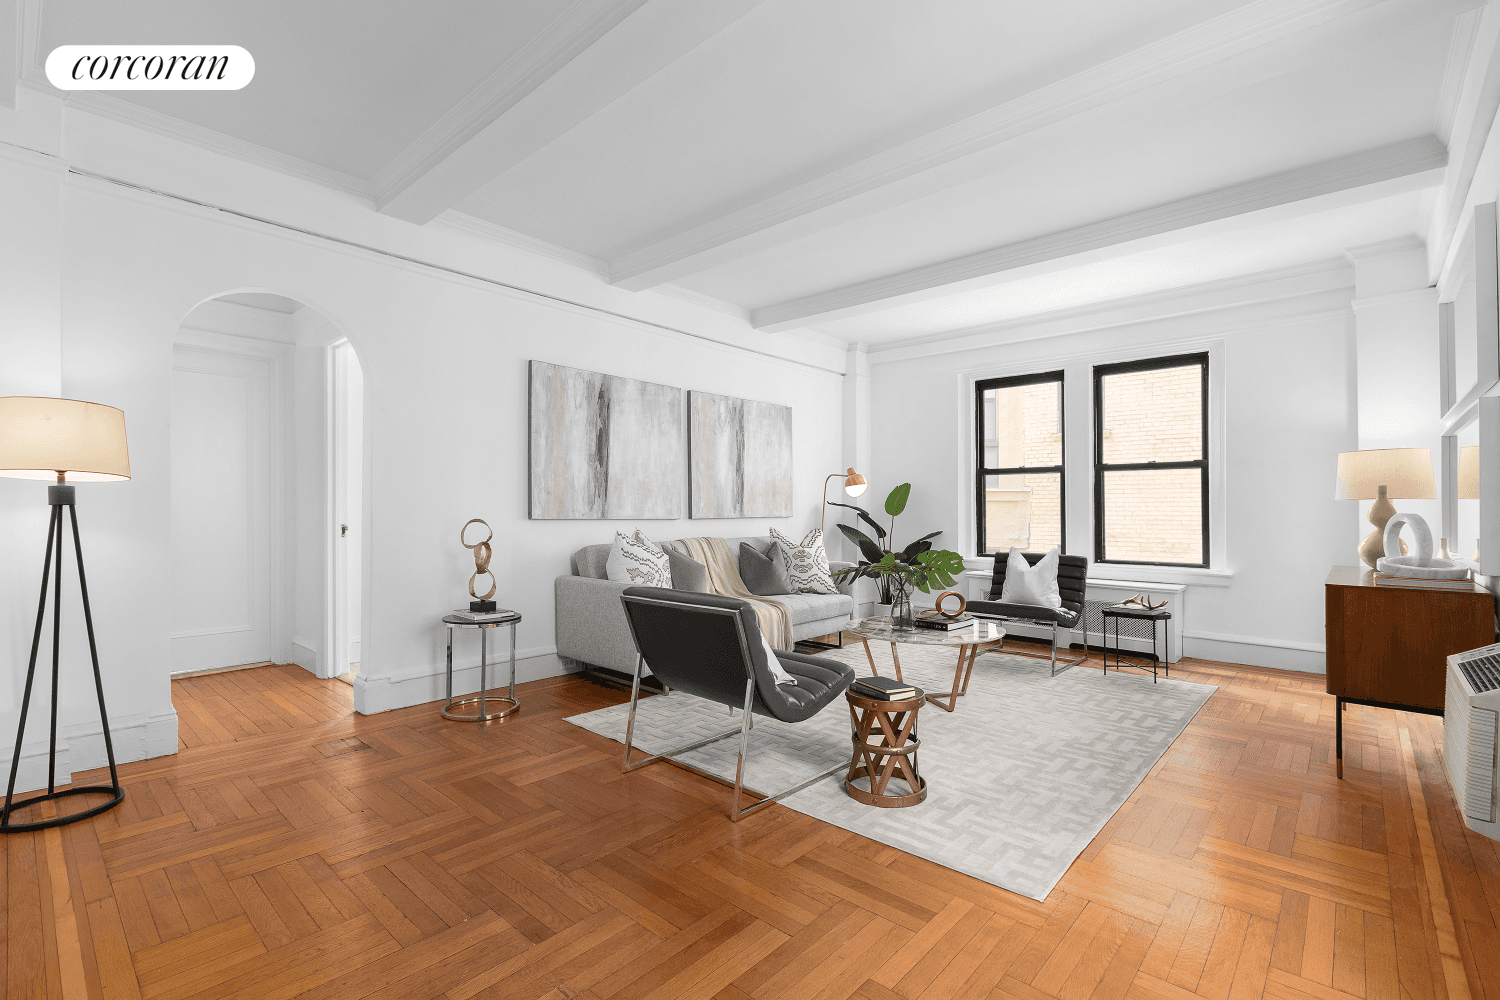 Welcome to Unit 5D at 245 West 74th Street, a spacious one bedroom home situated in the heart of NYC's coveted Upper West Side.